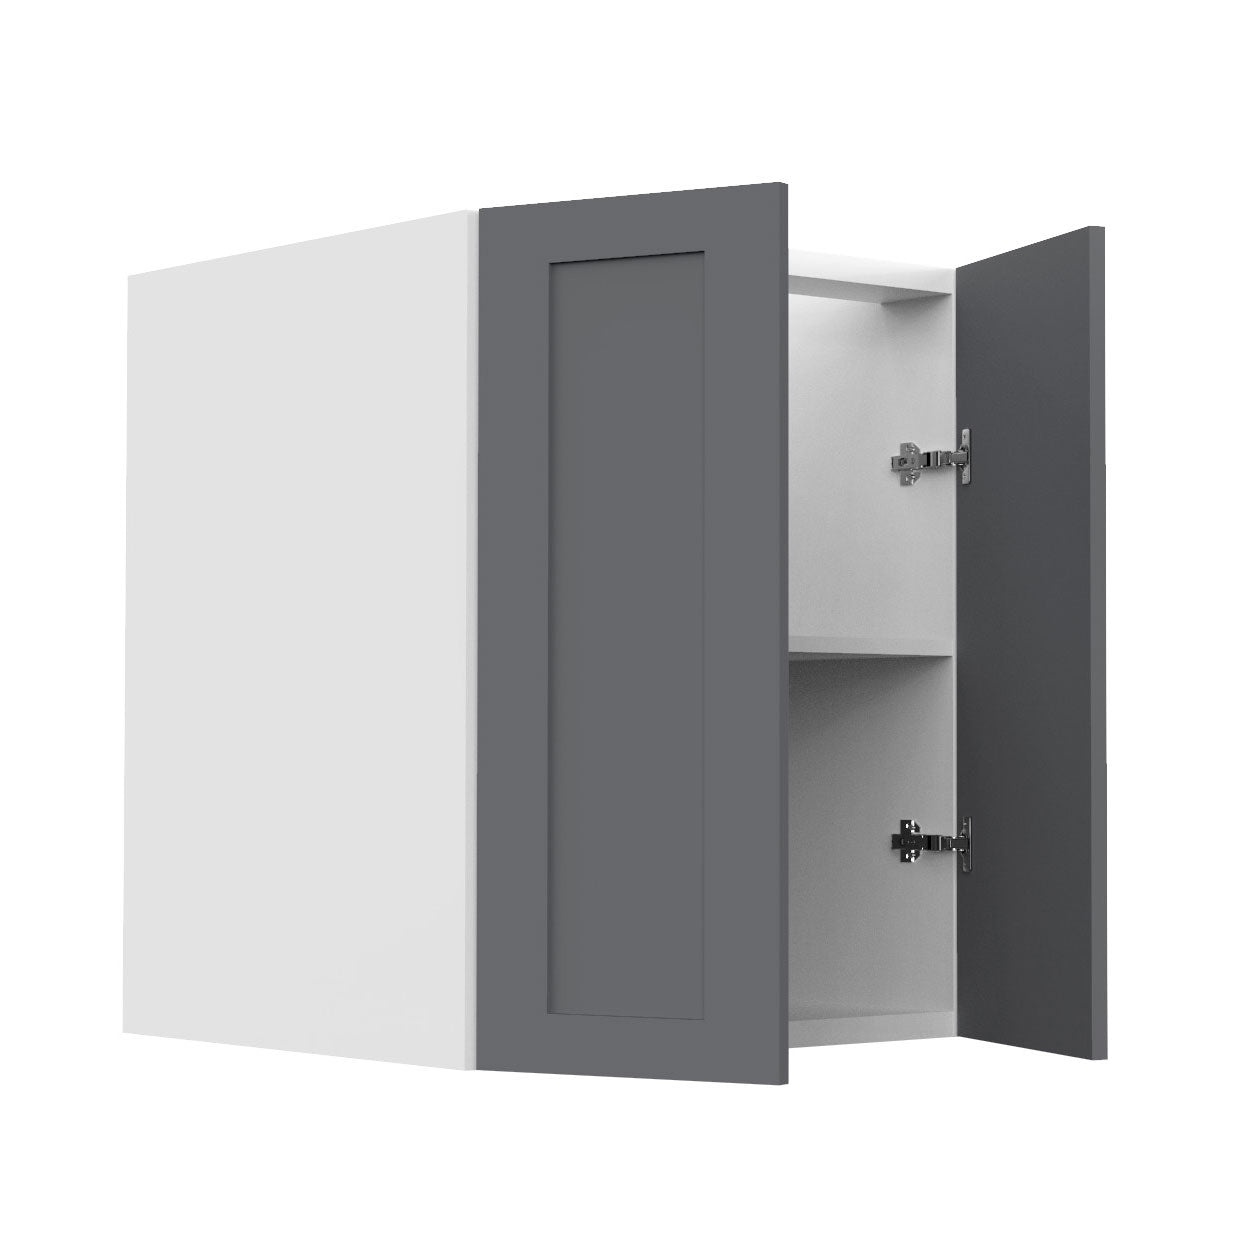 RTA - Grey Shaker - Full Height Double Door Base Cabinets | 24"W x 30"H x 23.8"D